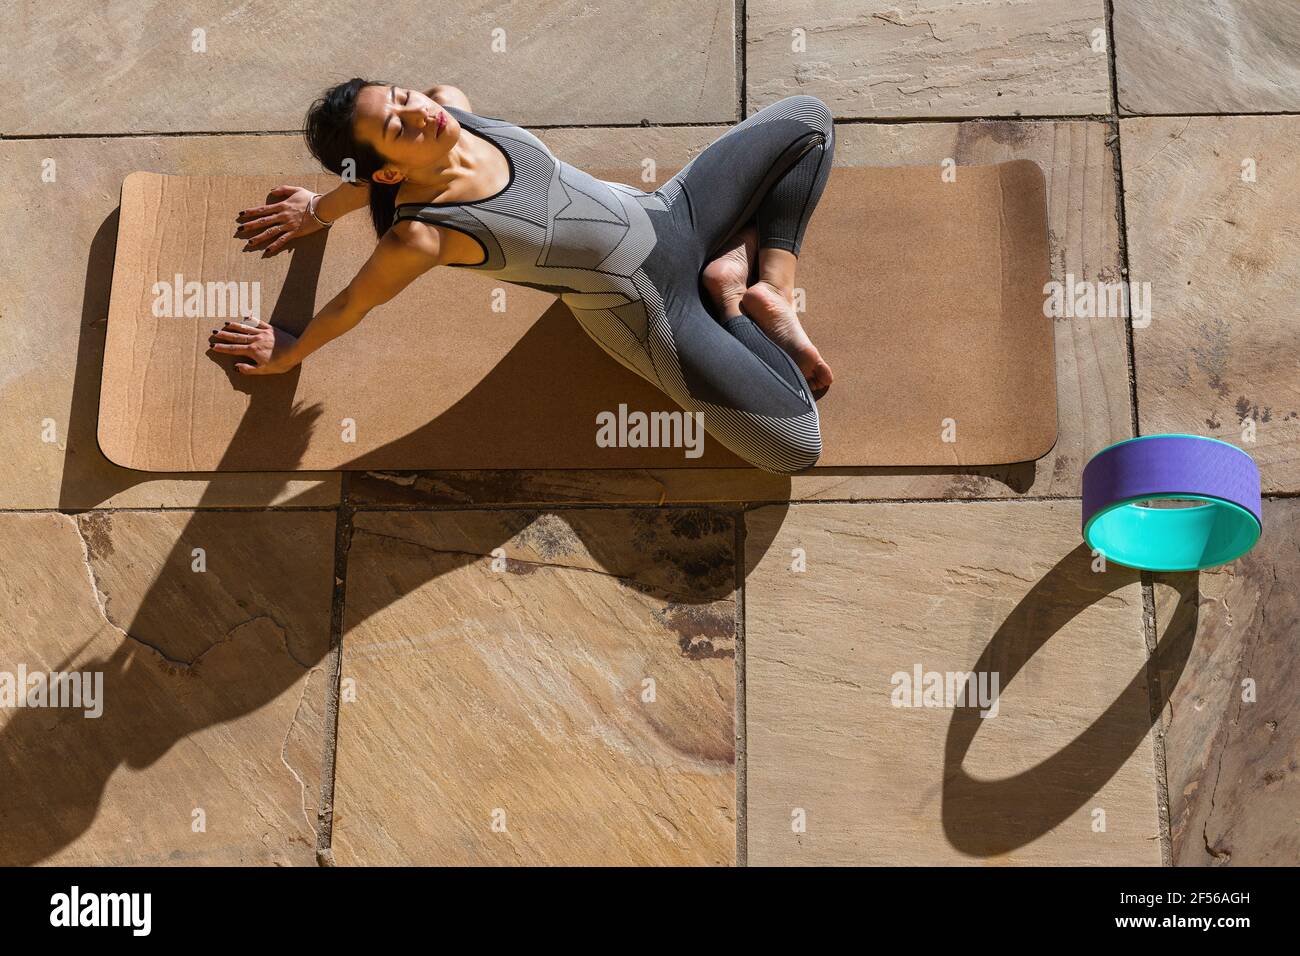 Sportswoman doing relaxation exercise on mat at promenade Stock Photo